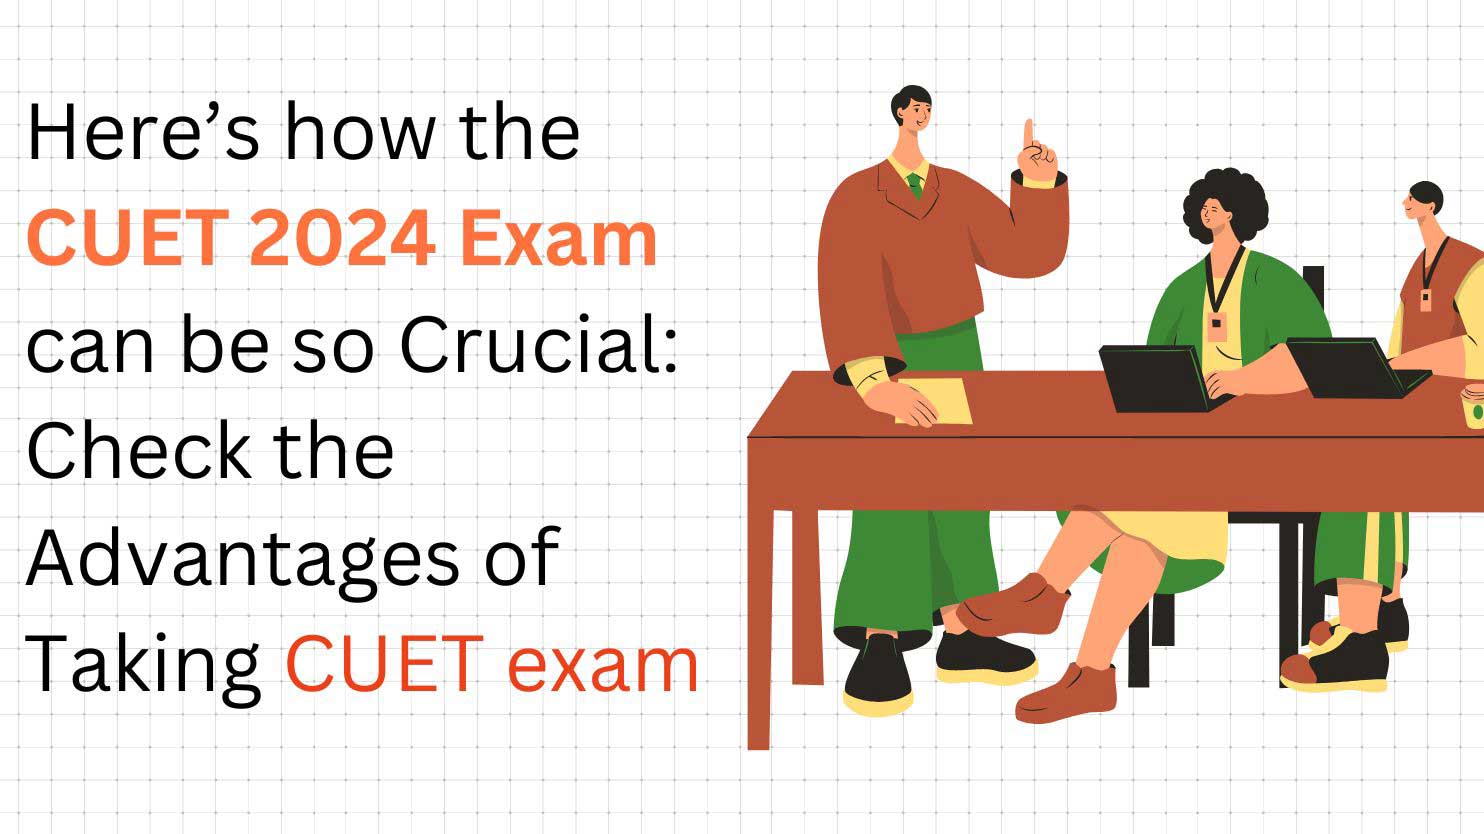 Here’s how the CUET 2024 Exam can be so Crucial: Check the Advantages of Taking CUET exam